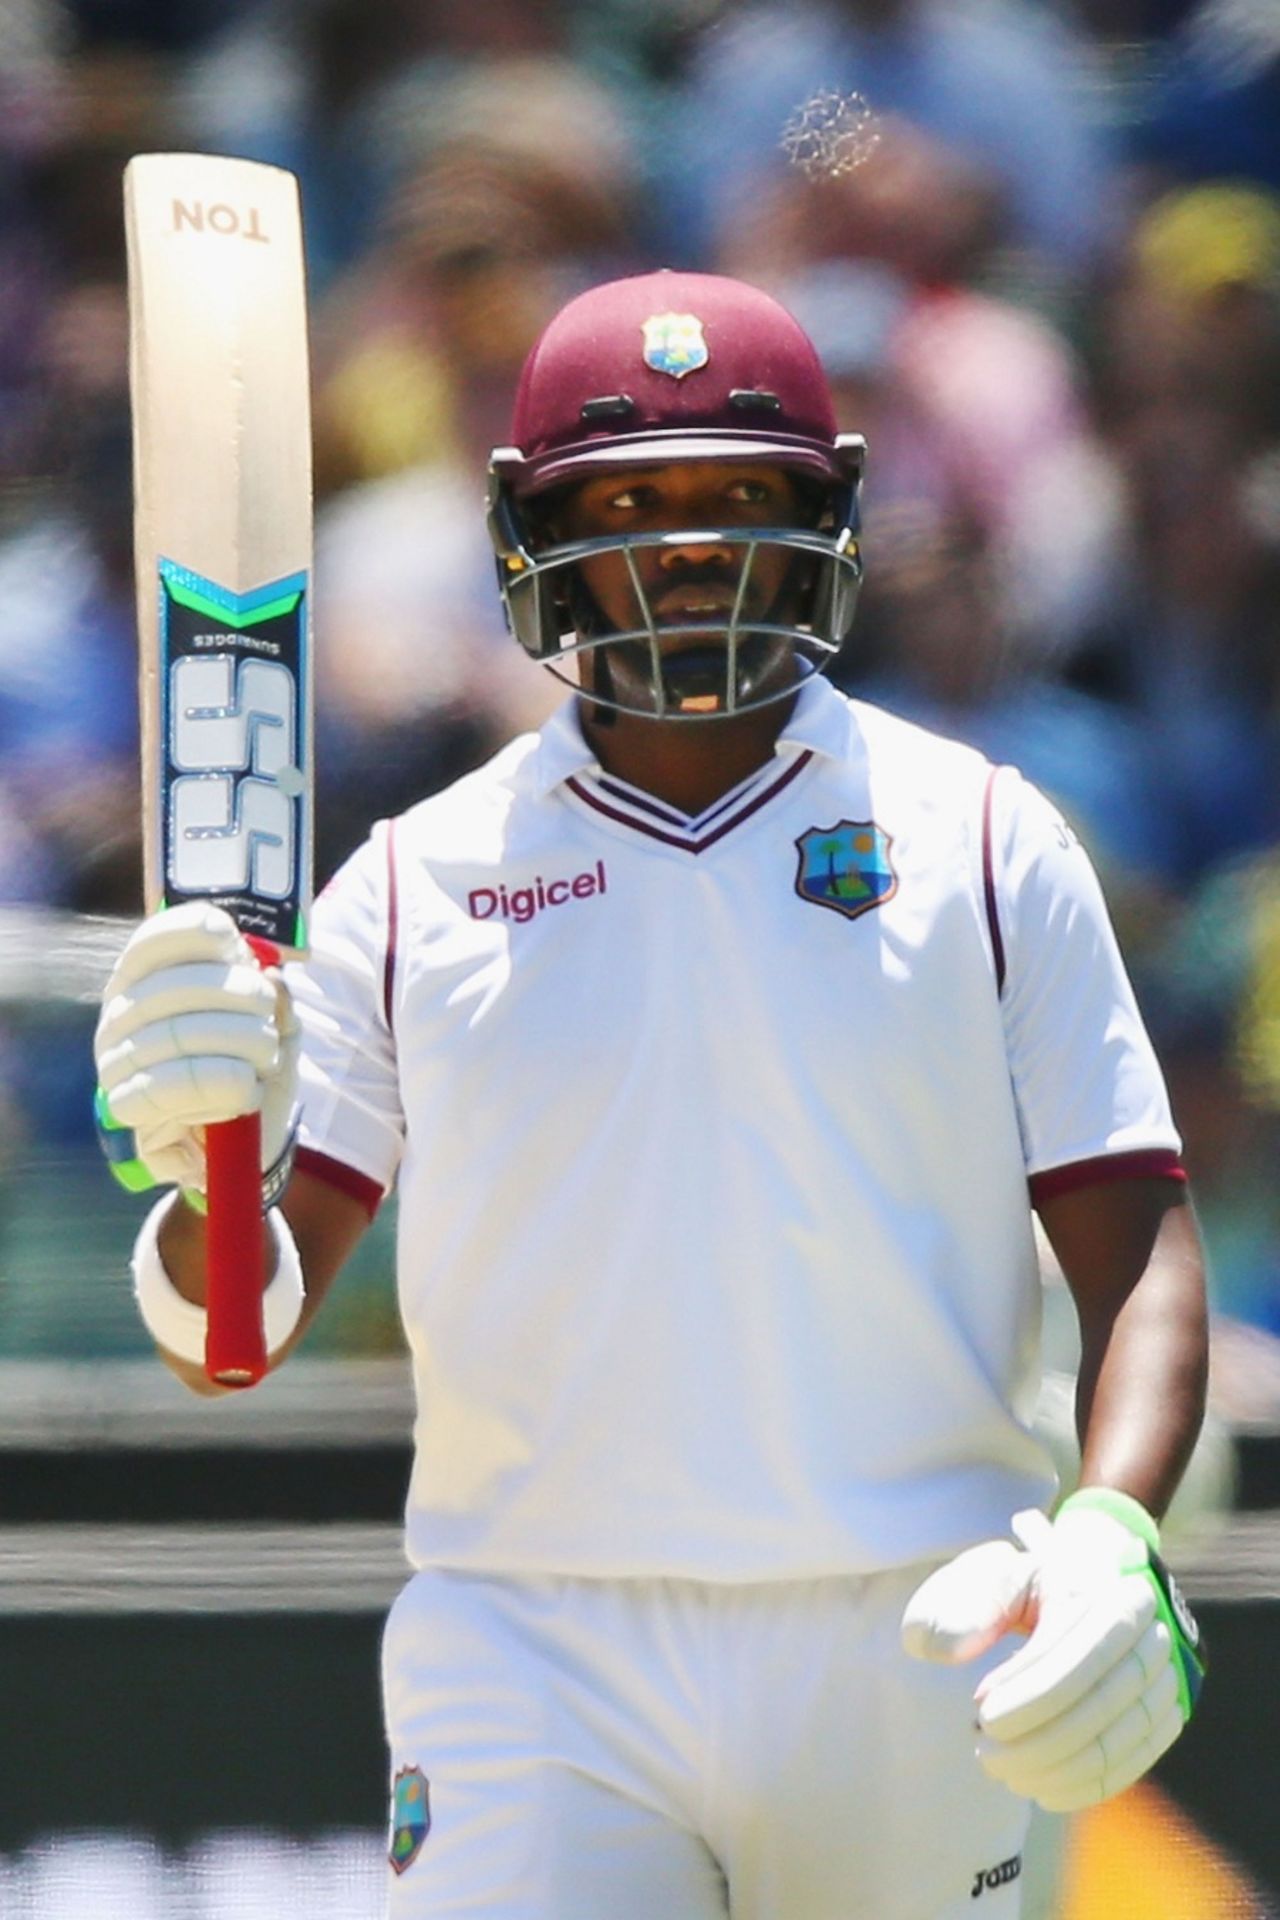 Darren Bravo raises his bat after reaching his fifty, Australia v West Indies, 2nd Test, Melbourne, 3rd day, December 28, 2015